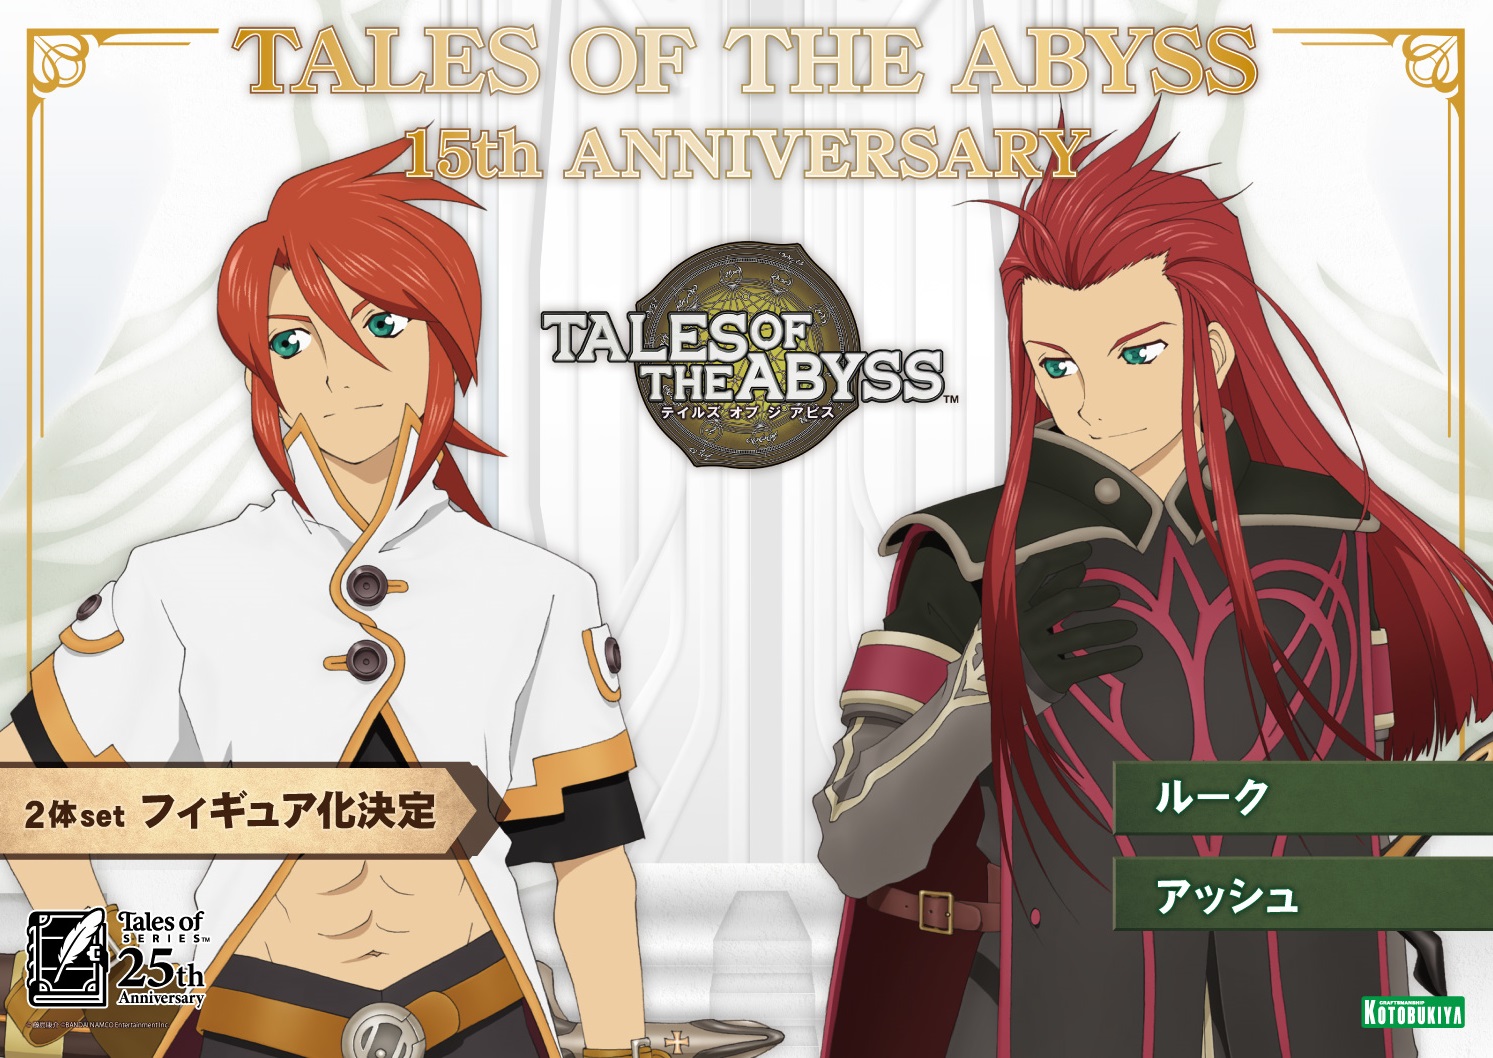 Tales of the Abyss Essentials Bluray  RightStuf